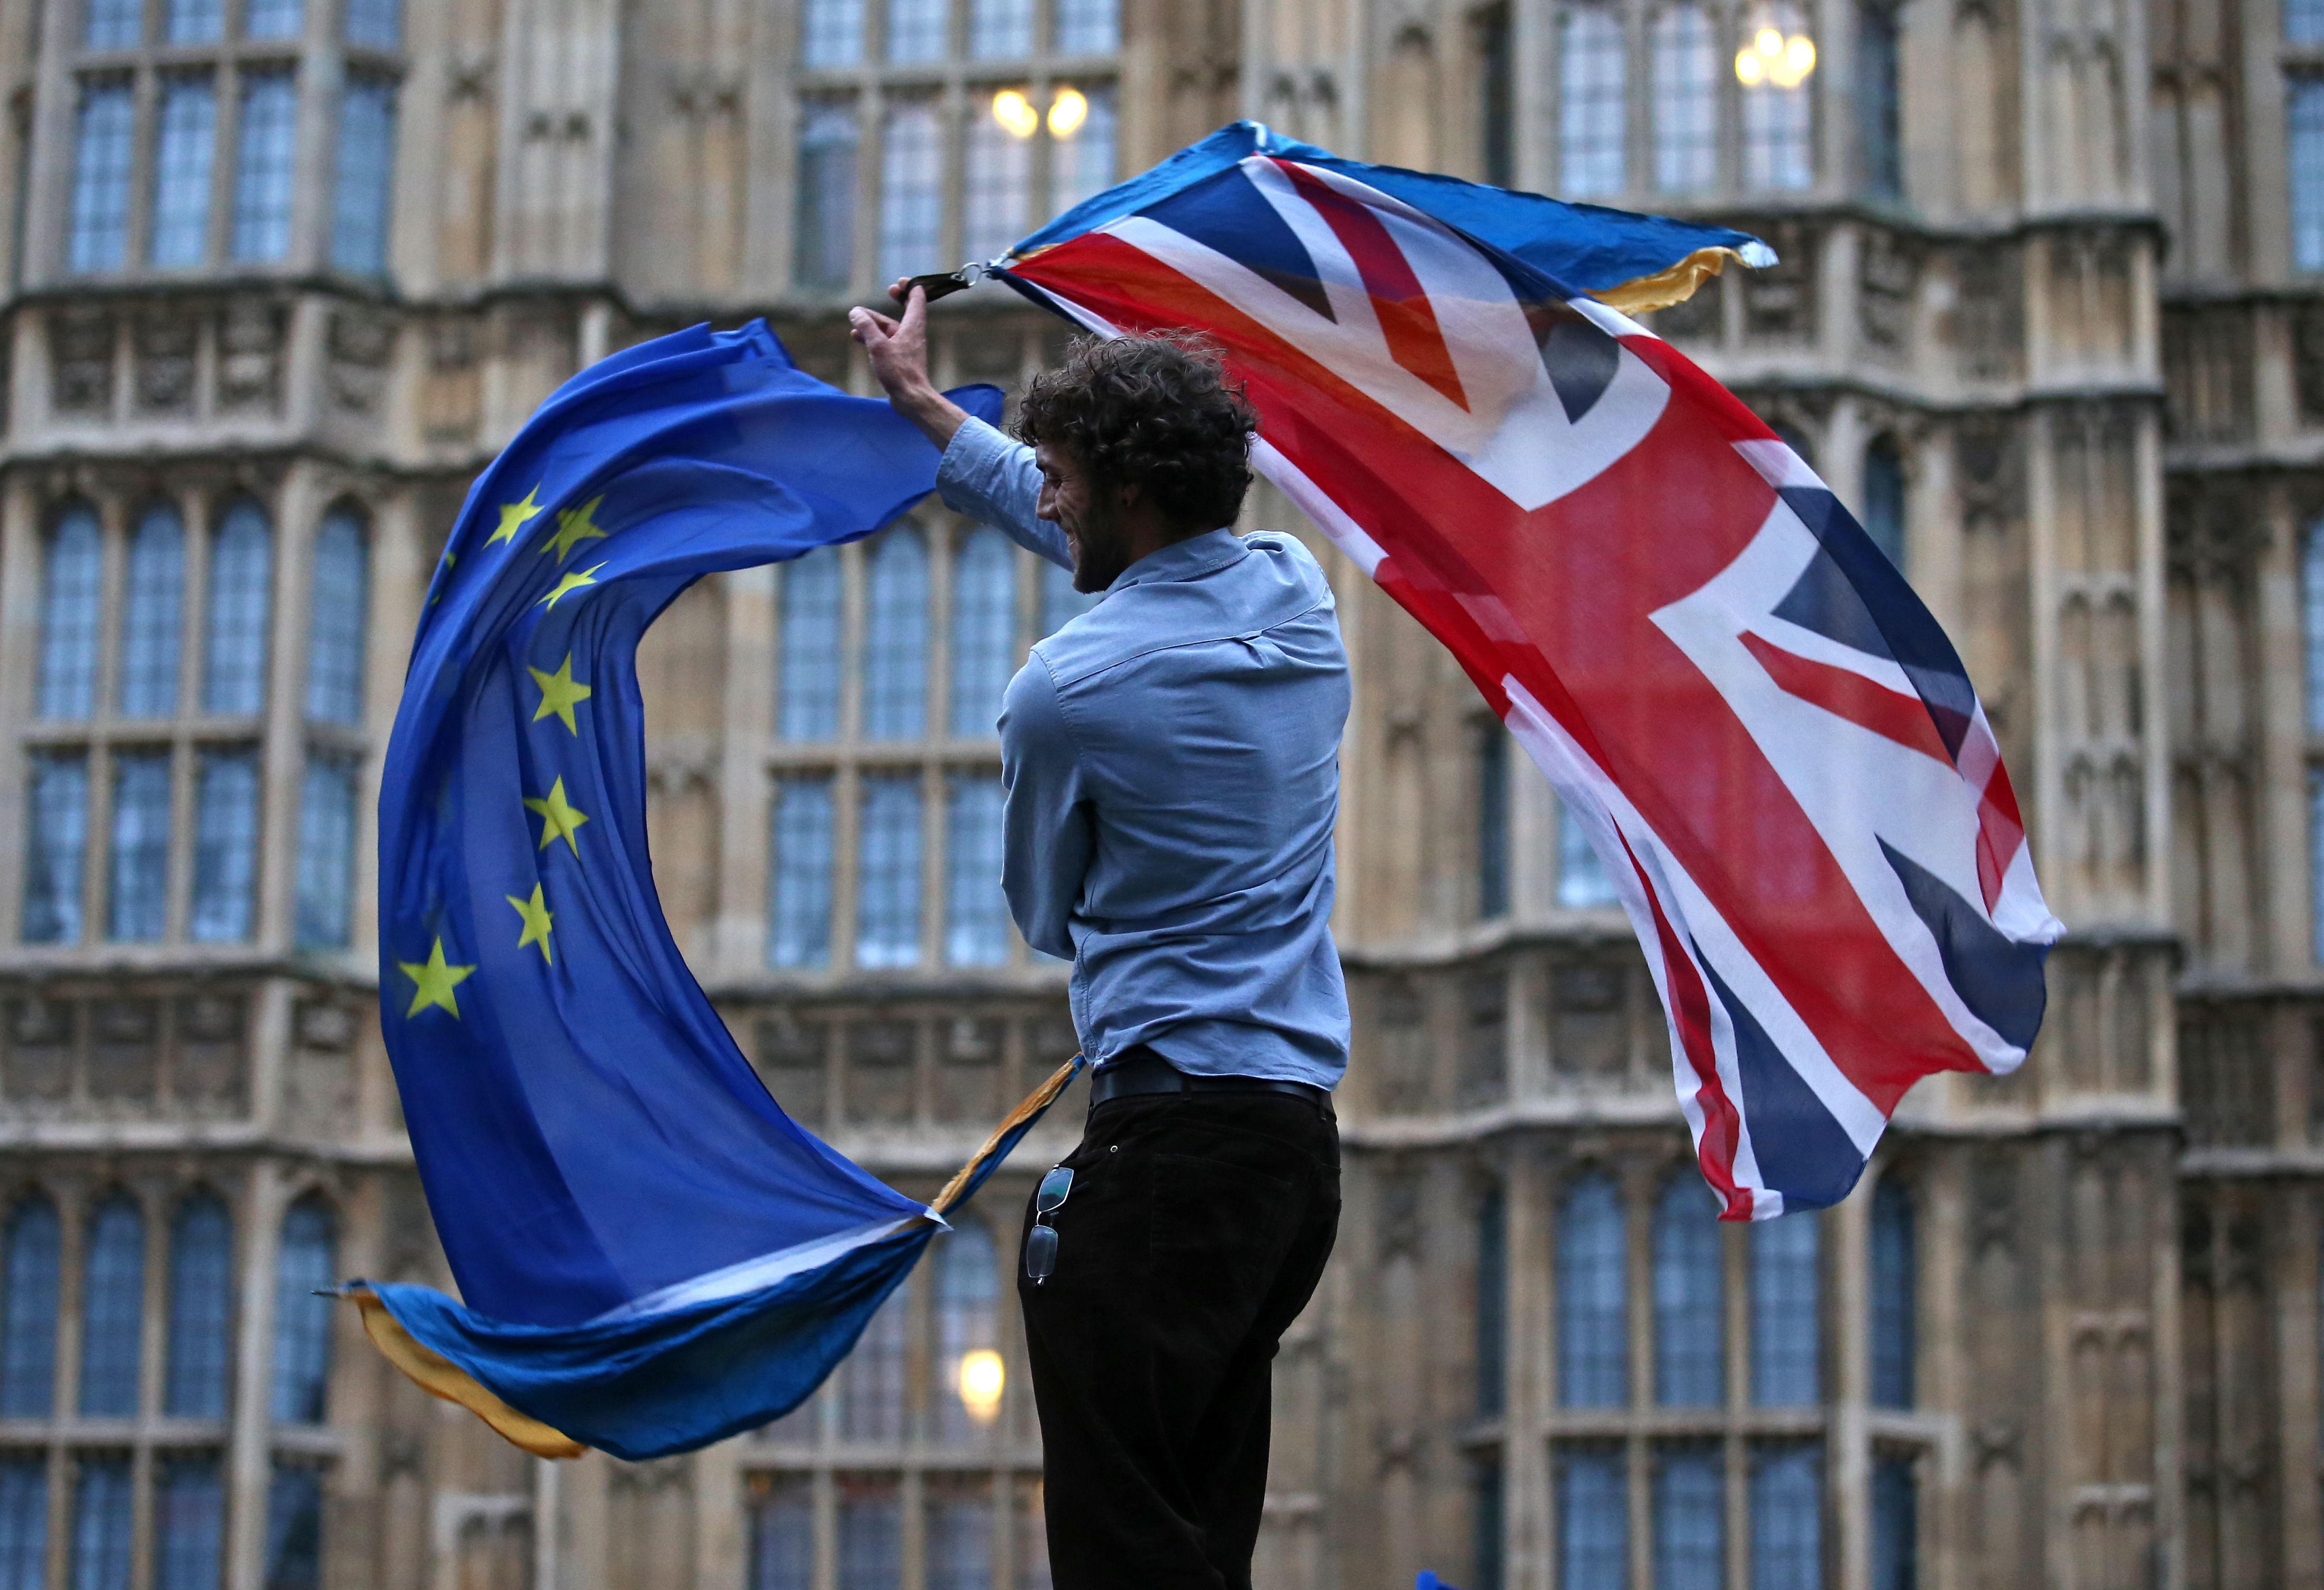 In this file photo taken on June 28, 2016 A man waves both a Union flag and a European flag together on College Green outside The Houses of Parliament at an anti-Brexit protest in central London on June 28, 2016. - Britain on December 17, 2020 sounded a more pessimistic note over the outcome of last-ditch Brexit trade talks with the European Union, saying a "no-deal" scenario was still on the cards. Prime Minister Boris Johnson's spokesman said negotiators from both sides were working to "bridge the gaps that remain", as the EU indicated a deal was "difficult but possible" by Friday. Credit: AFP Photo